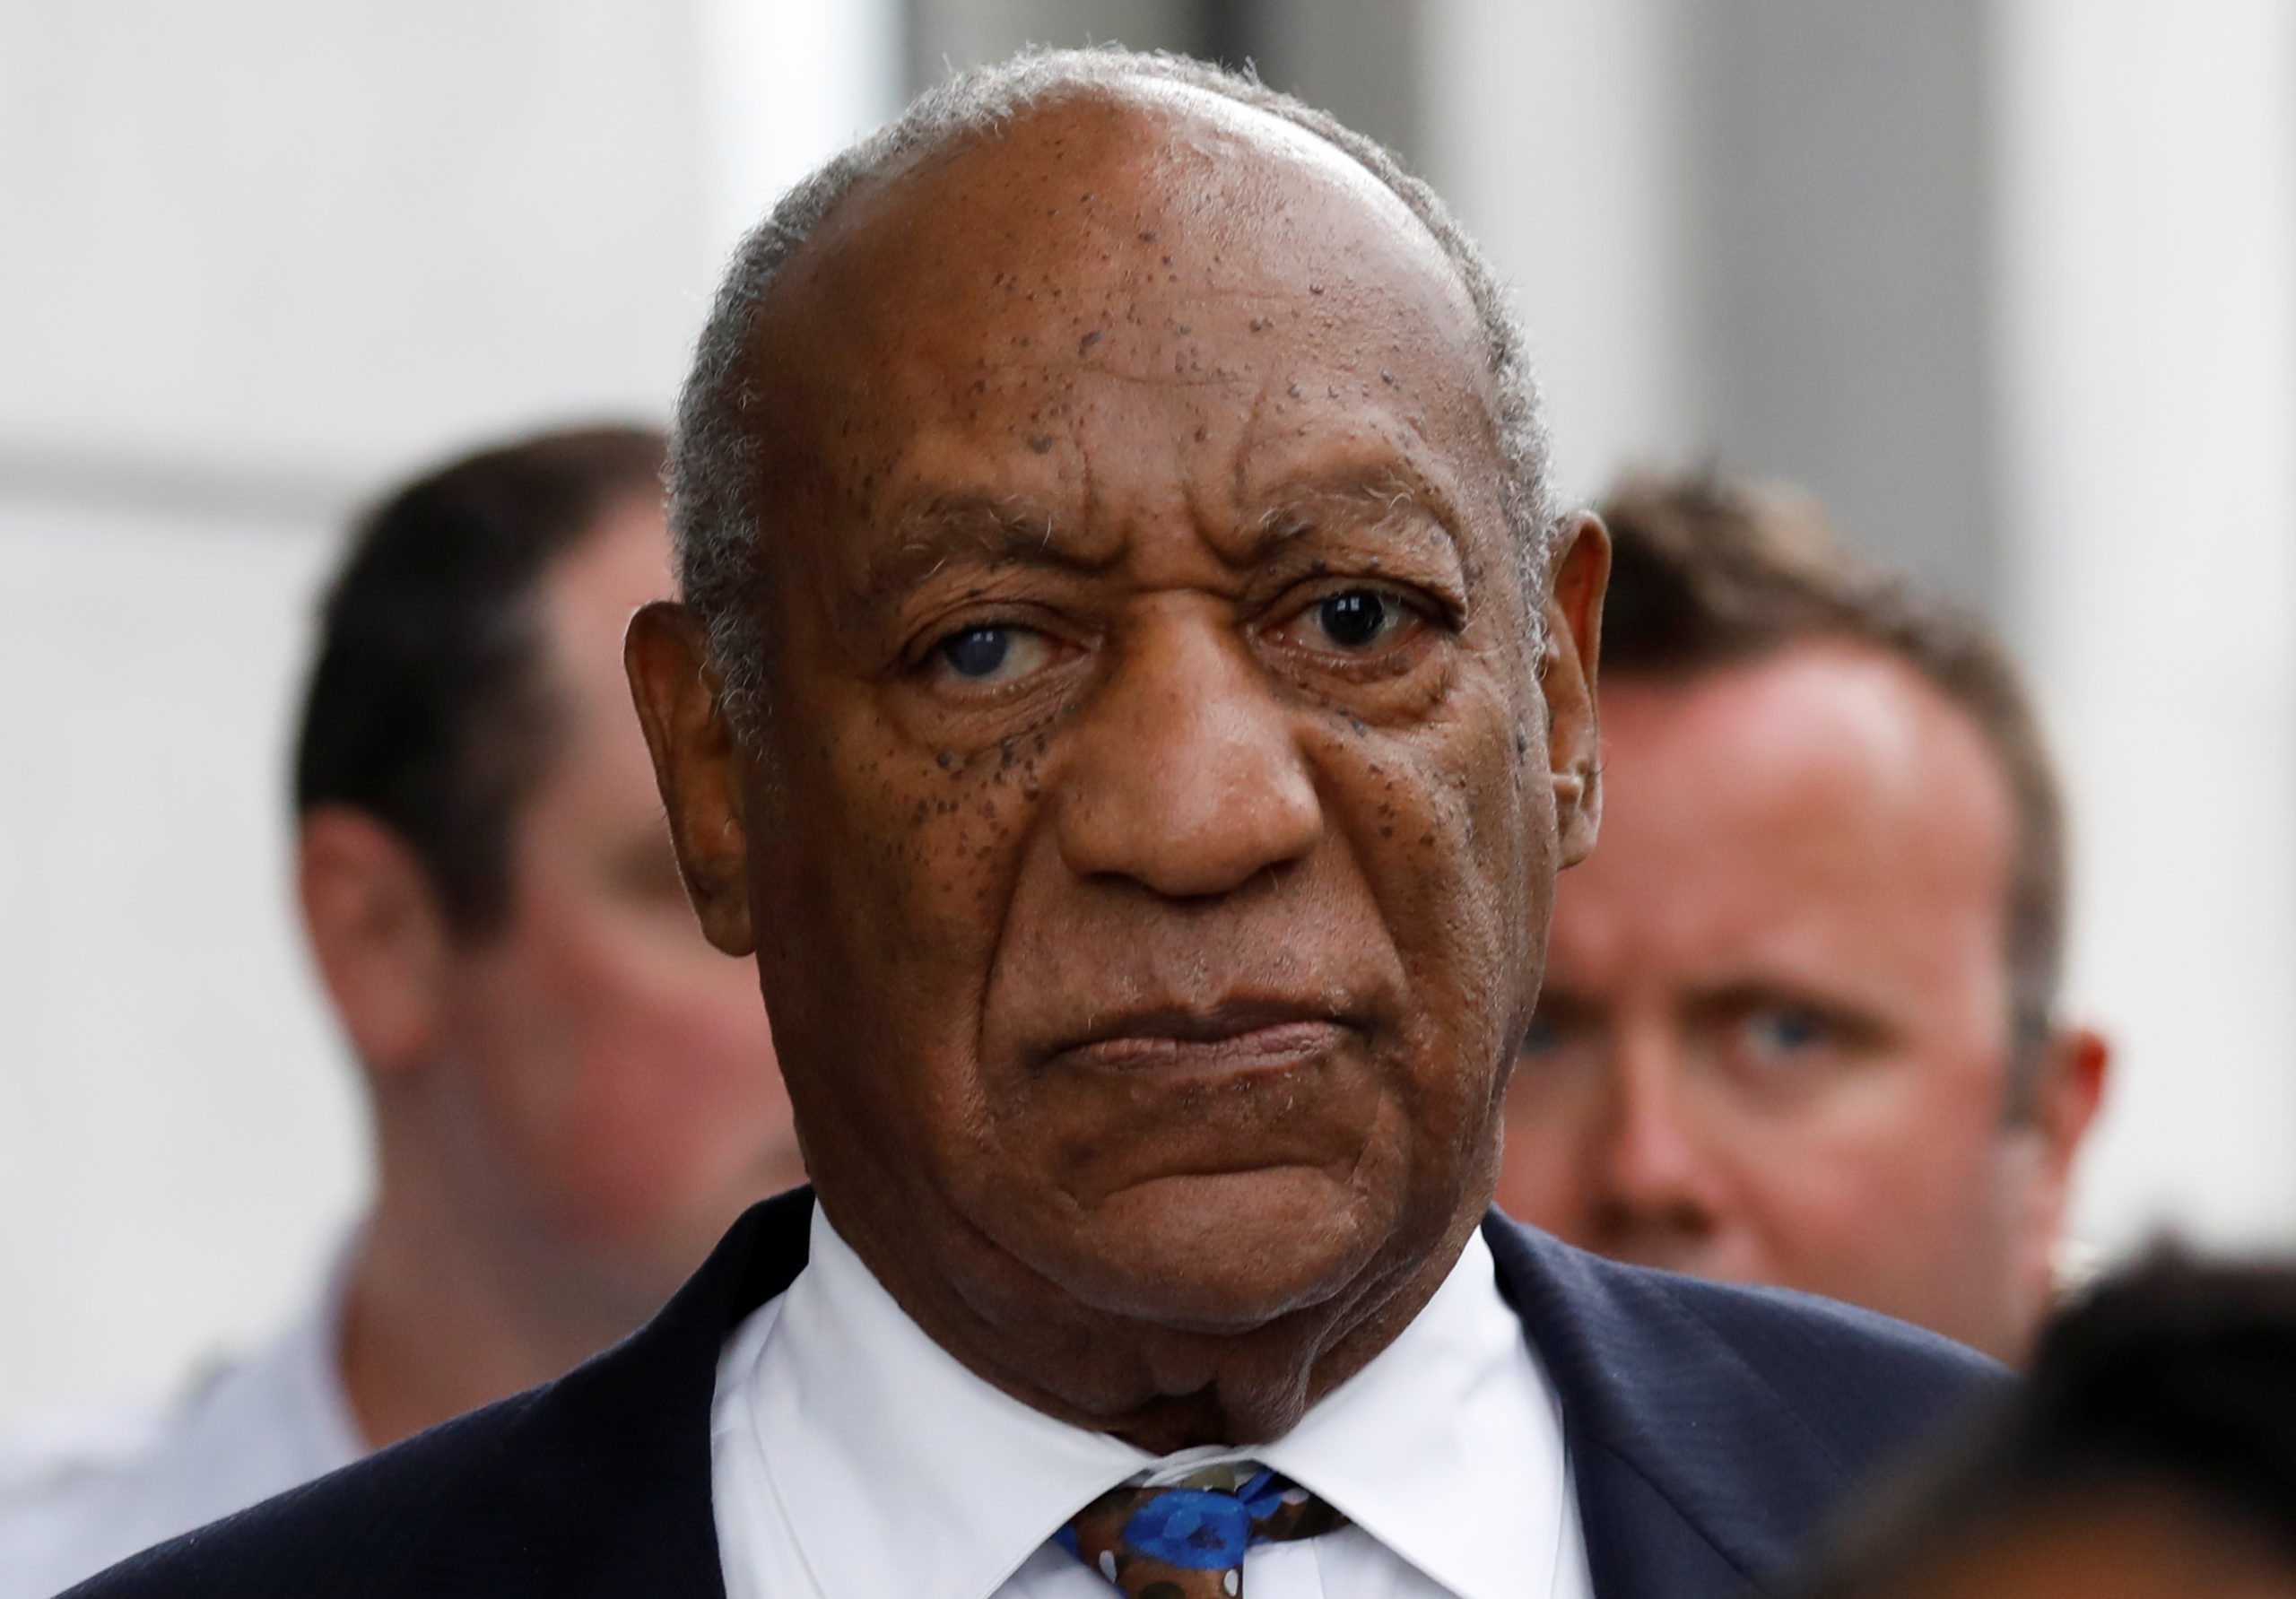 Actor and comedian Bill Cosby leaves the Montgomery County Courthouse after the first day of his sexual assault trial's sentencing hearing in Norristown, Pennsylvania, U.S. September 24, 2018. REUTERS/Brendan McDermid